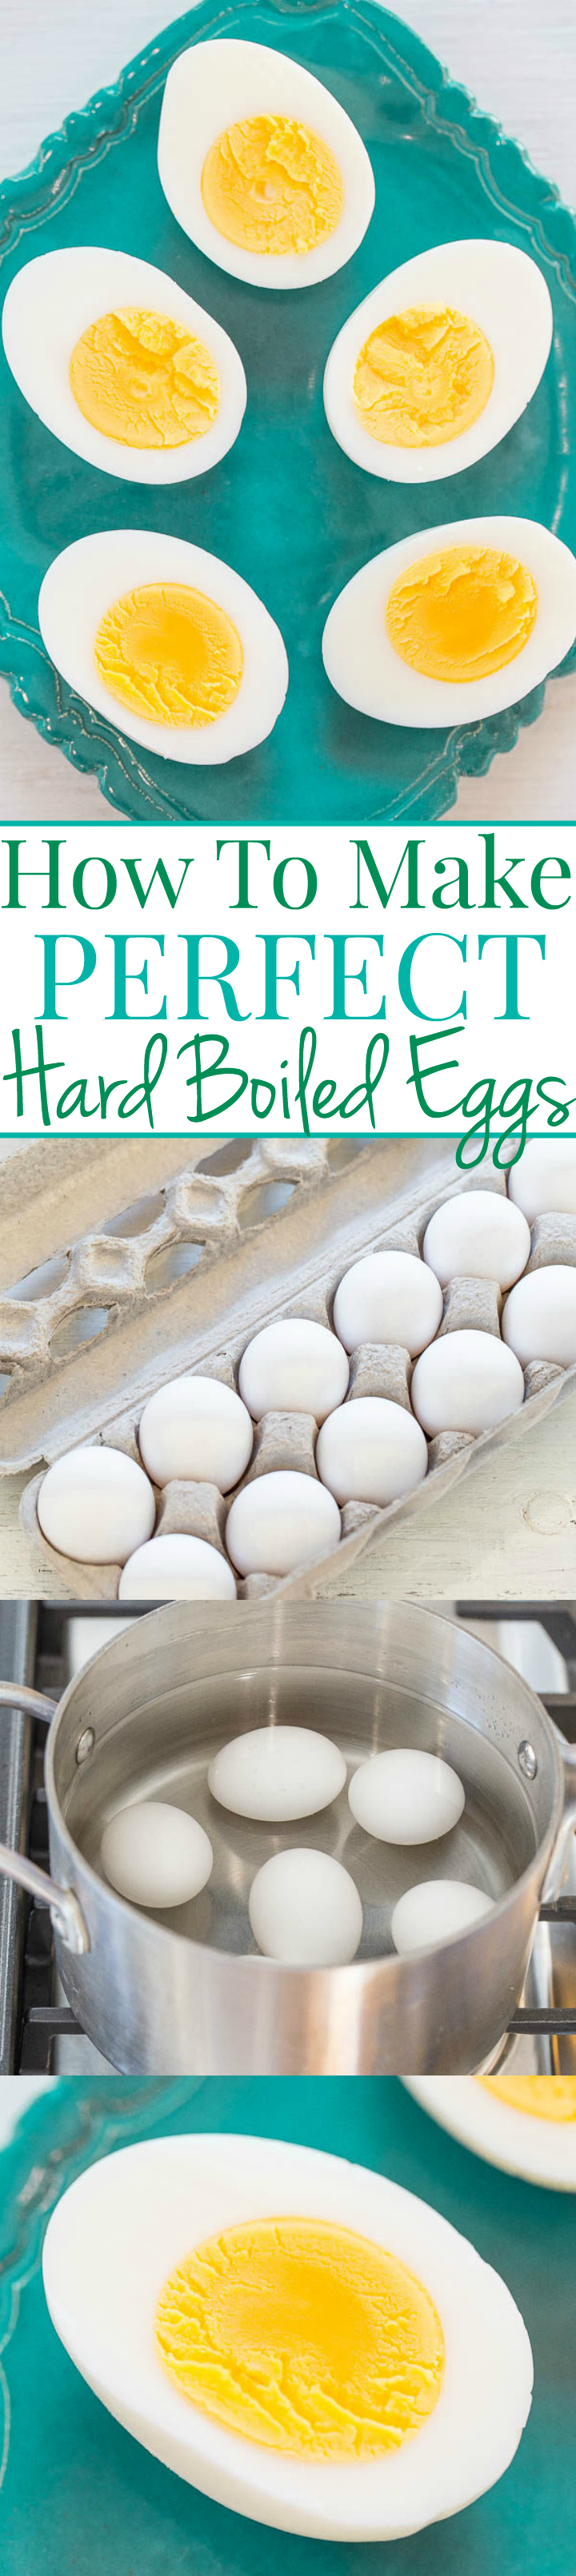 How to make perfect hard boiled eggs - Small Town Woman